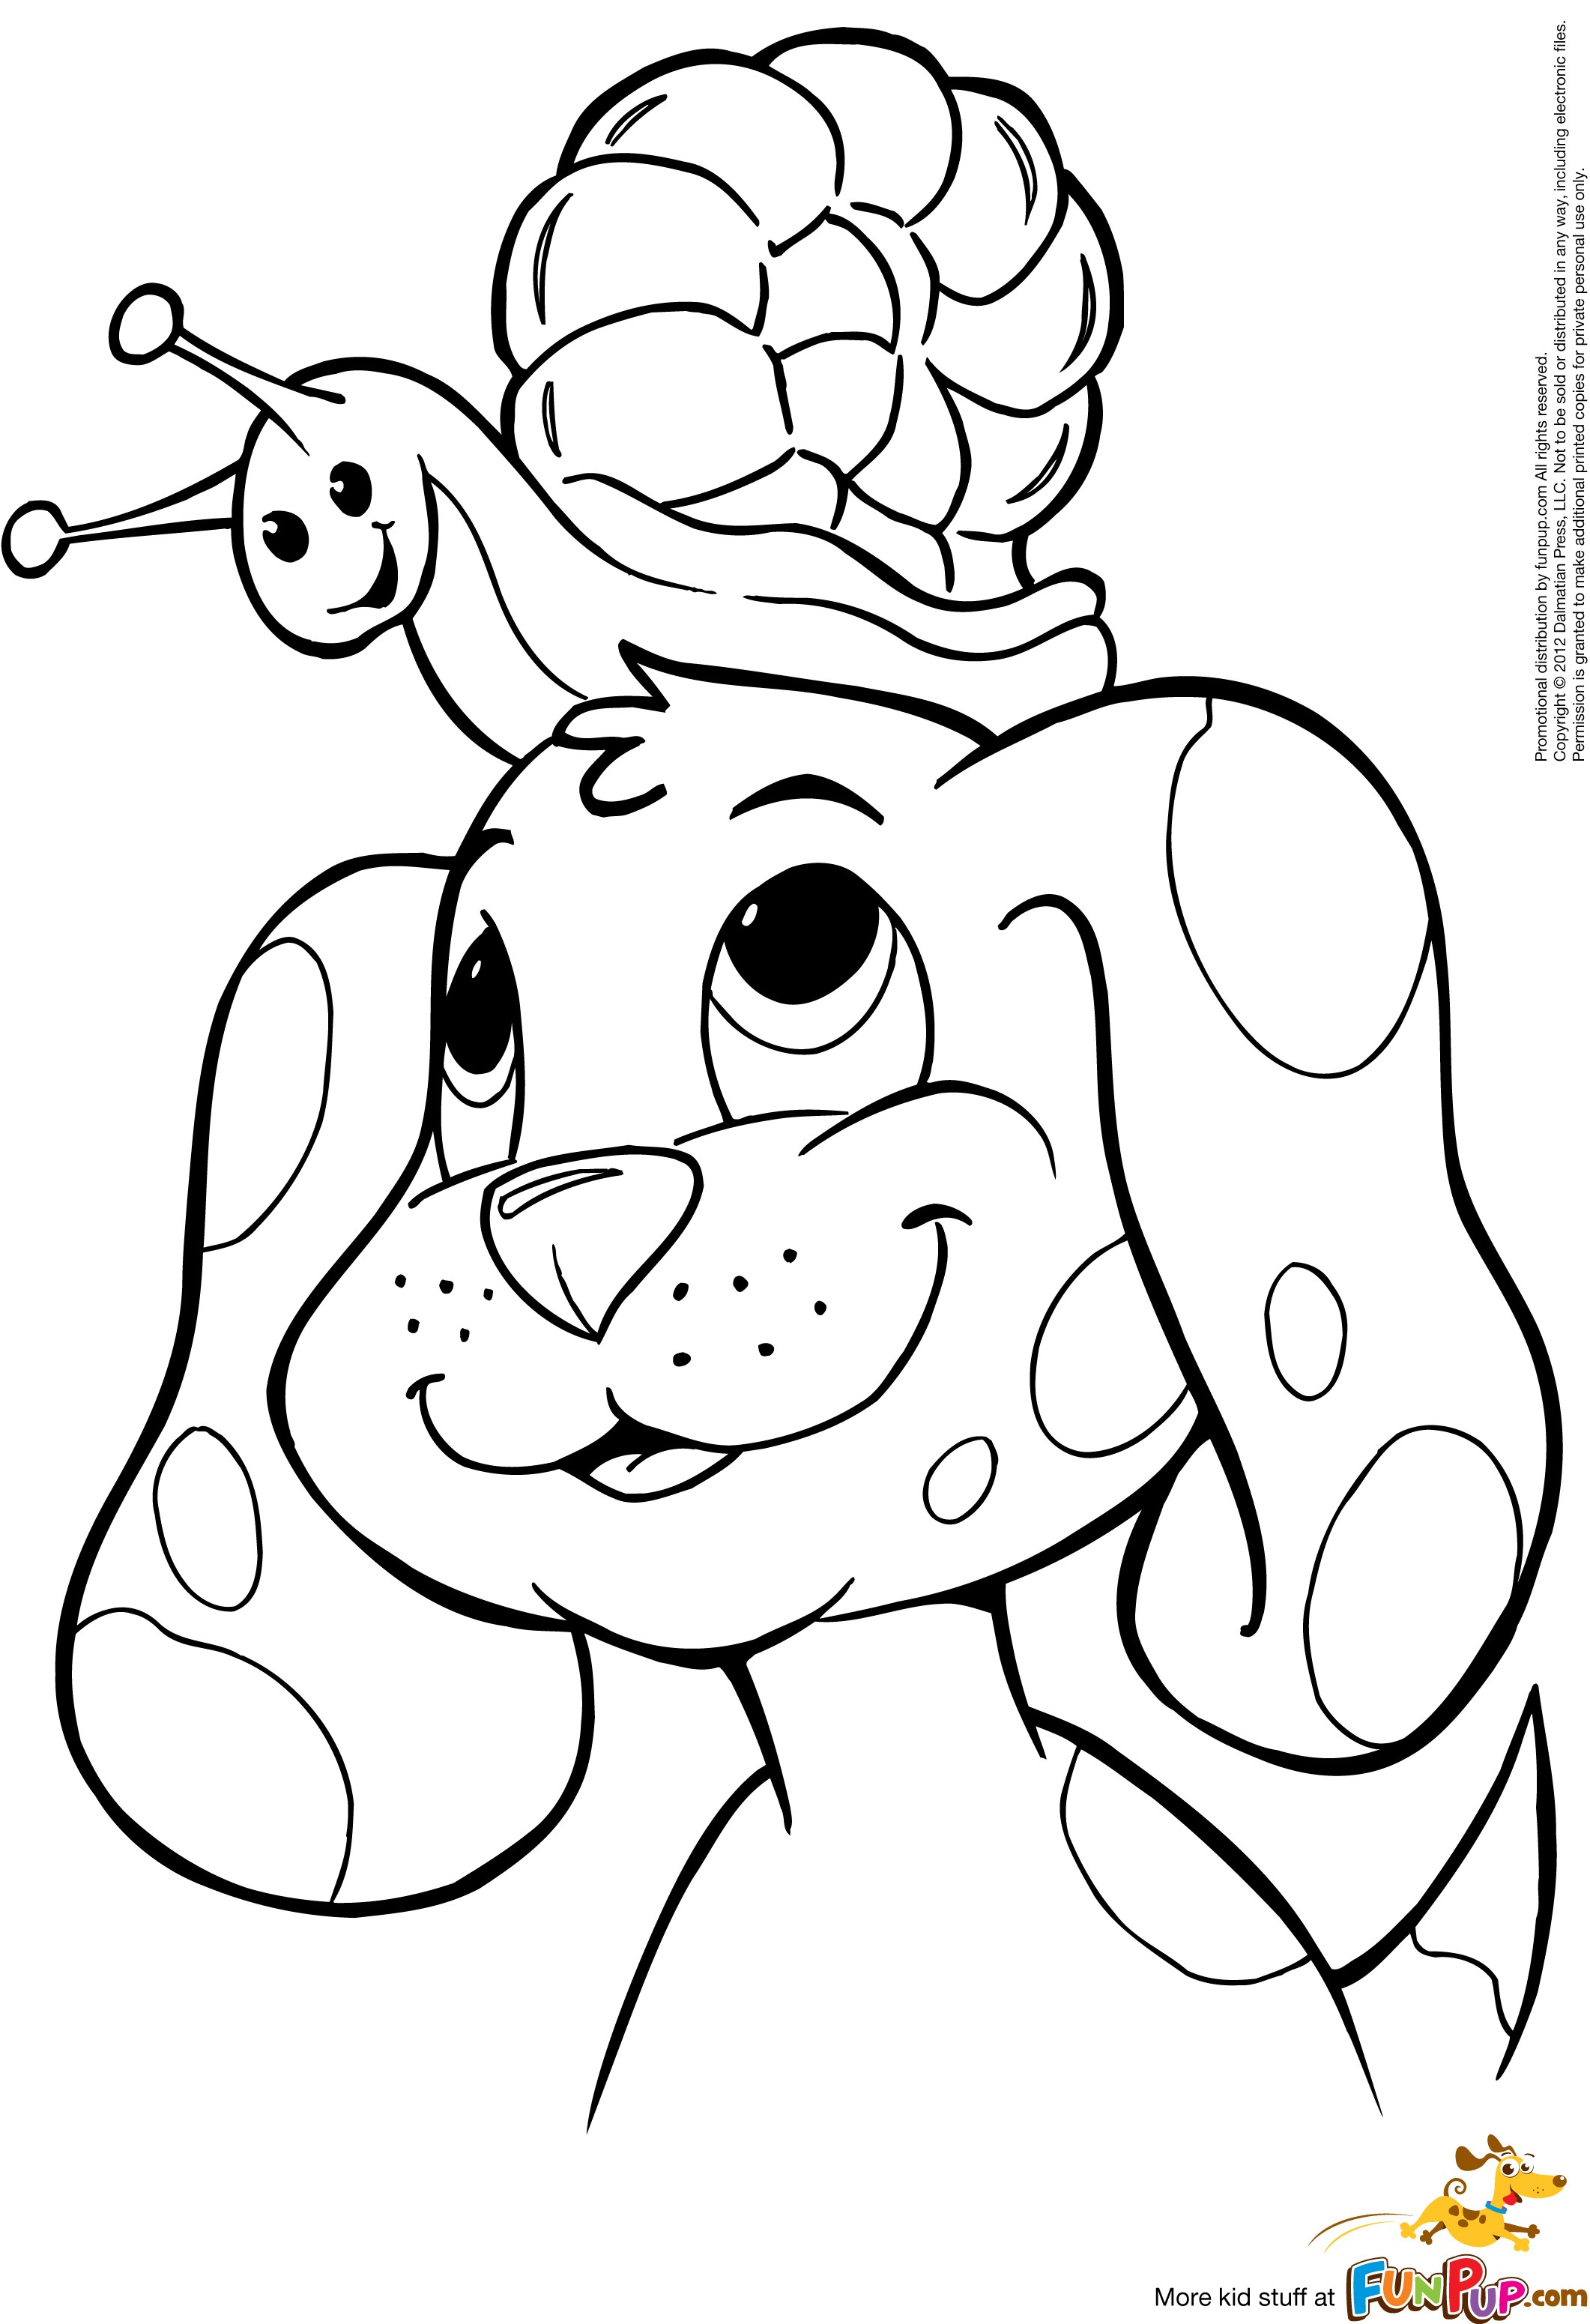 Easy Puppy Coloring Pages at GetColorings.com   Free printable ...